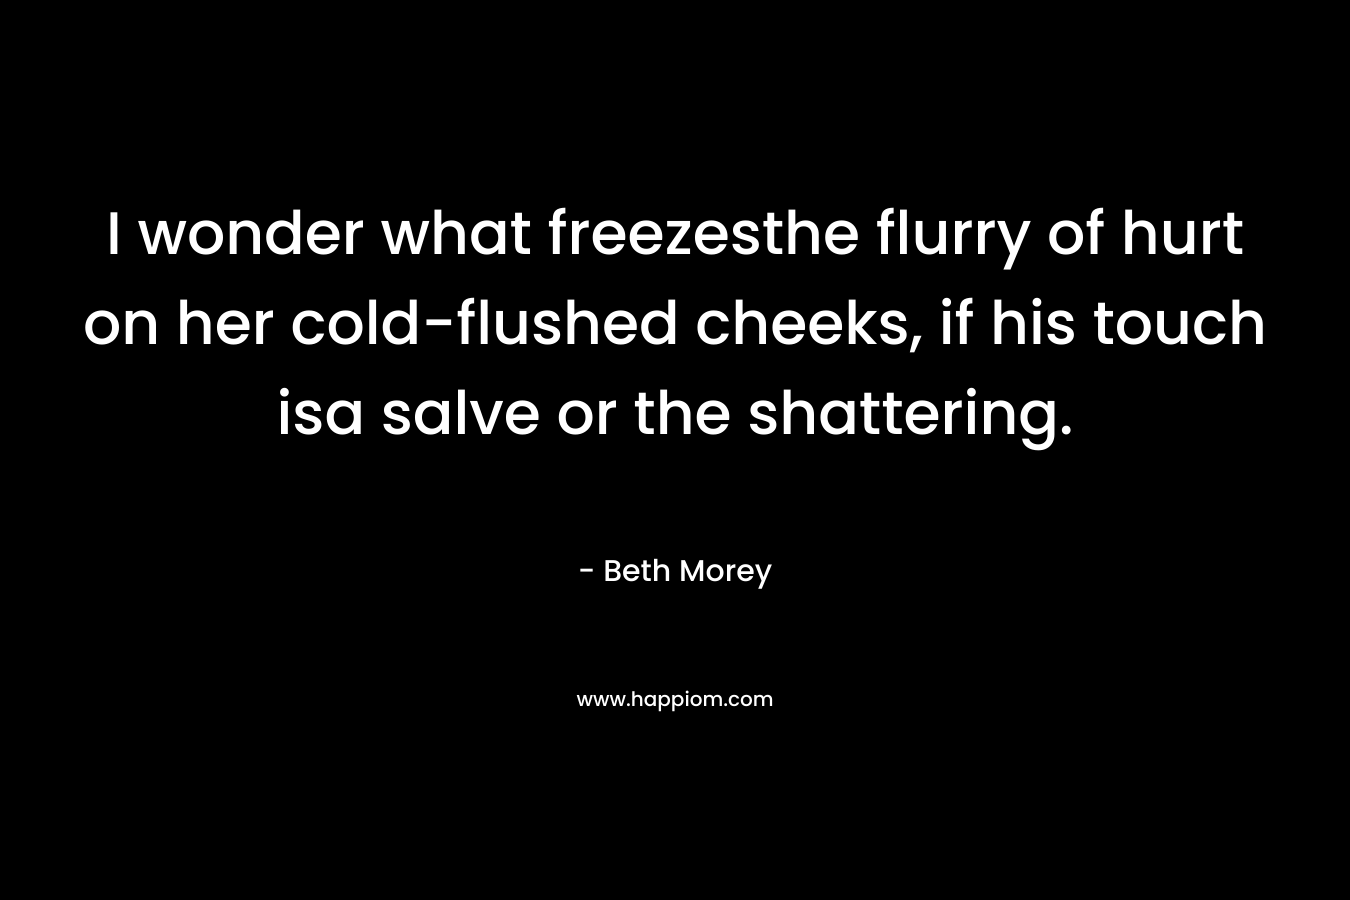 I wonder what freezesthe flurry of hurt on her cold-flushed cheeks, if his touch isa salve or the shattering.